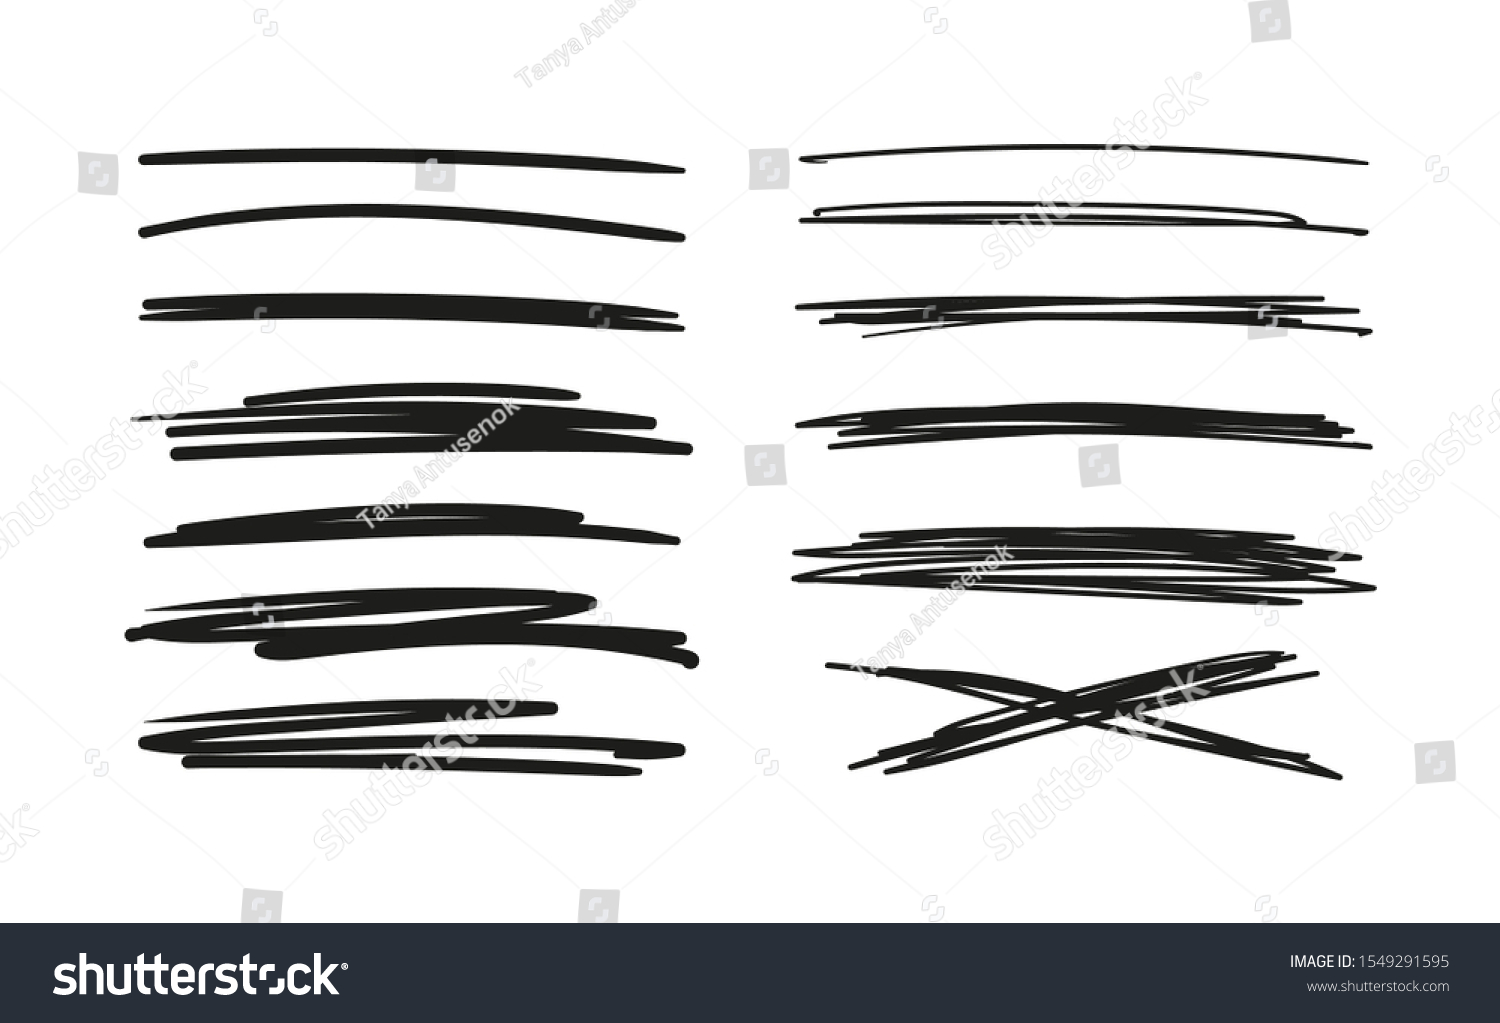 Set of hand drawn lines. Doodle design. Scribble with a pen, stripes with a pencil. Black abstract elements for design. Stock vector isolated on white background. #1549291595